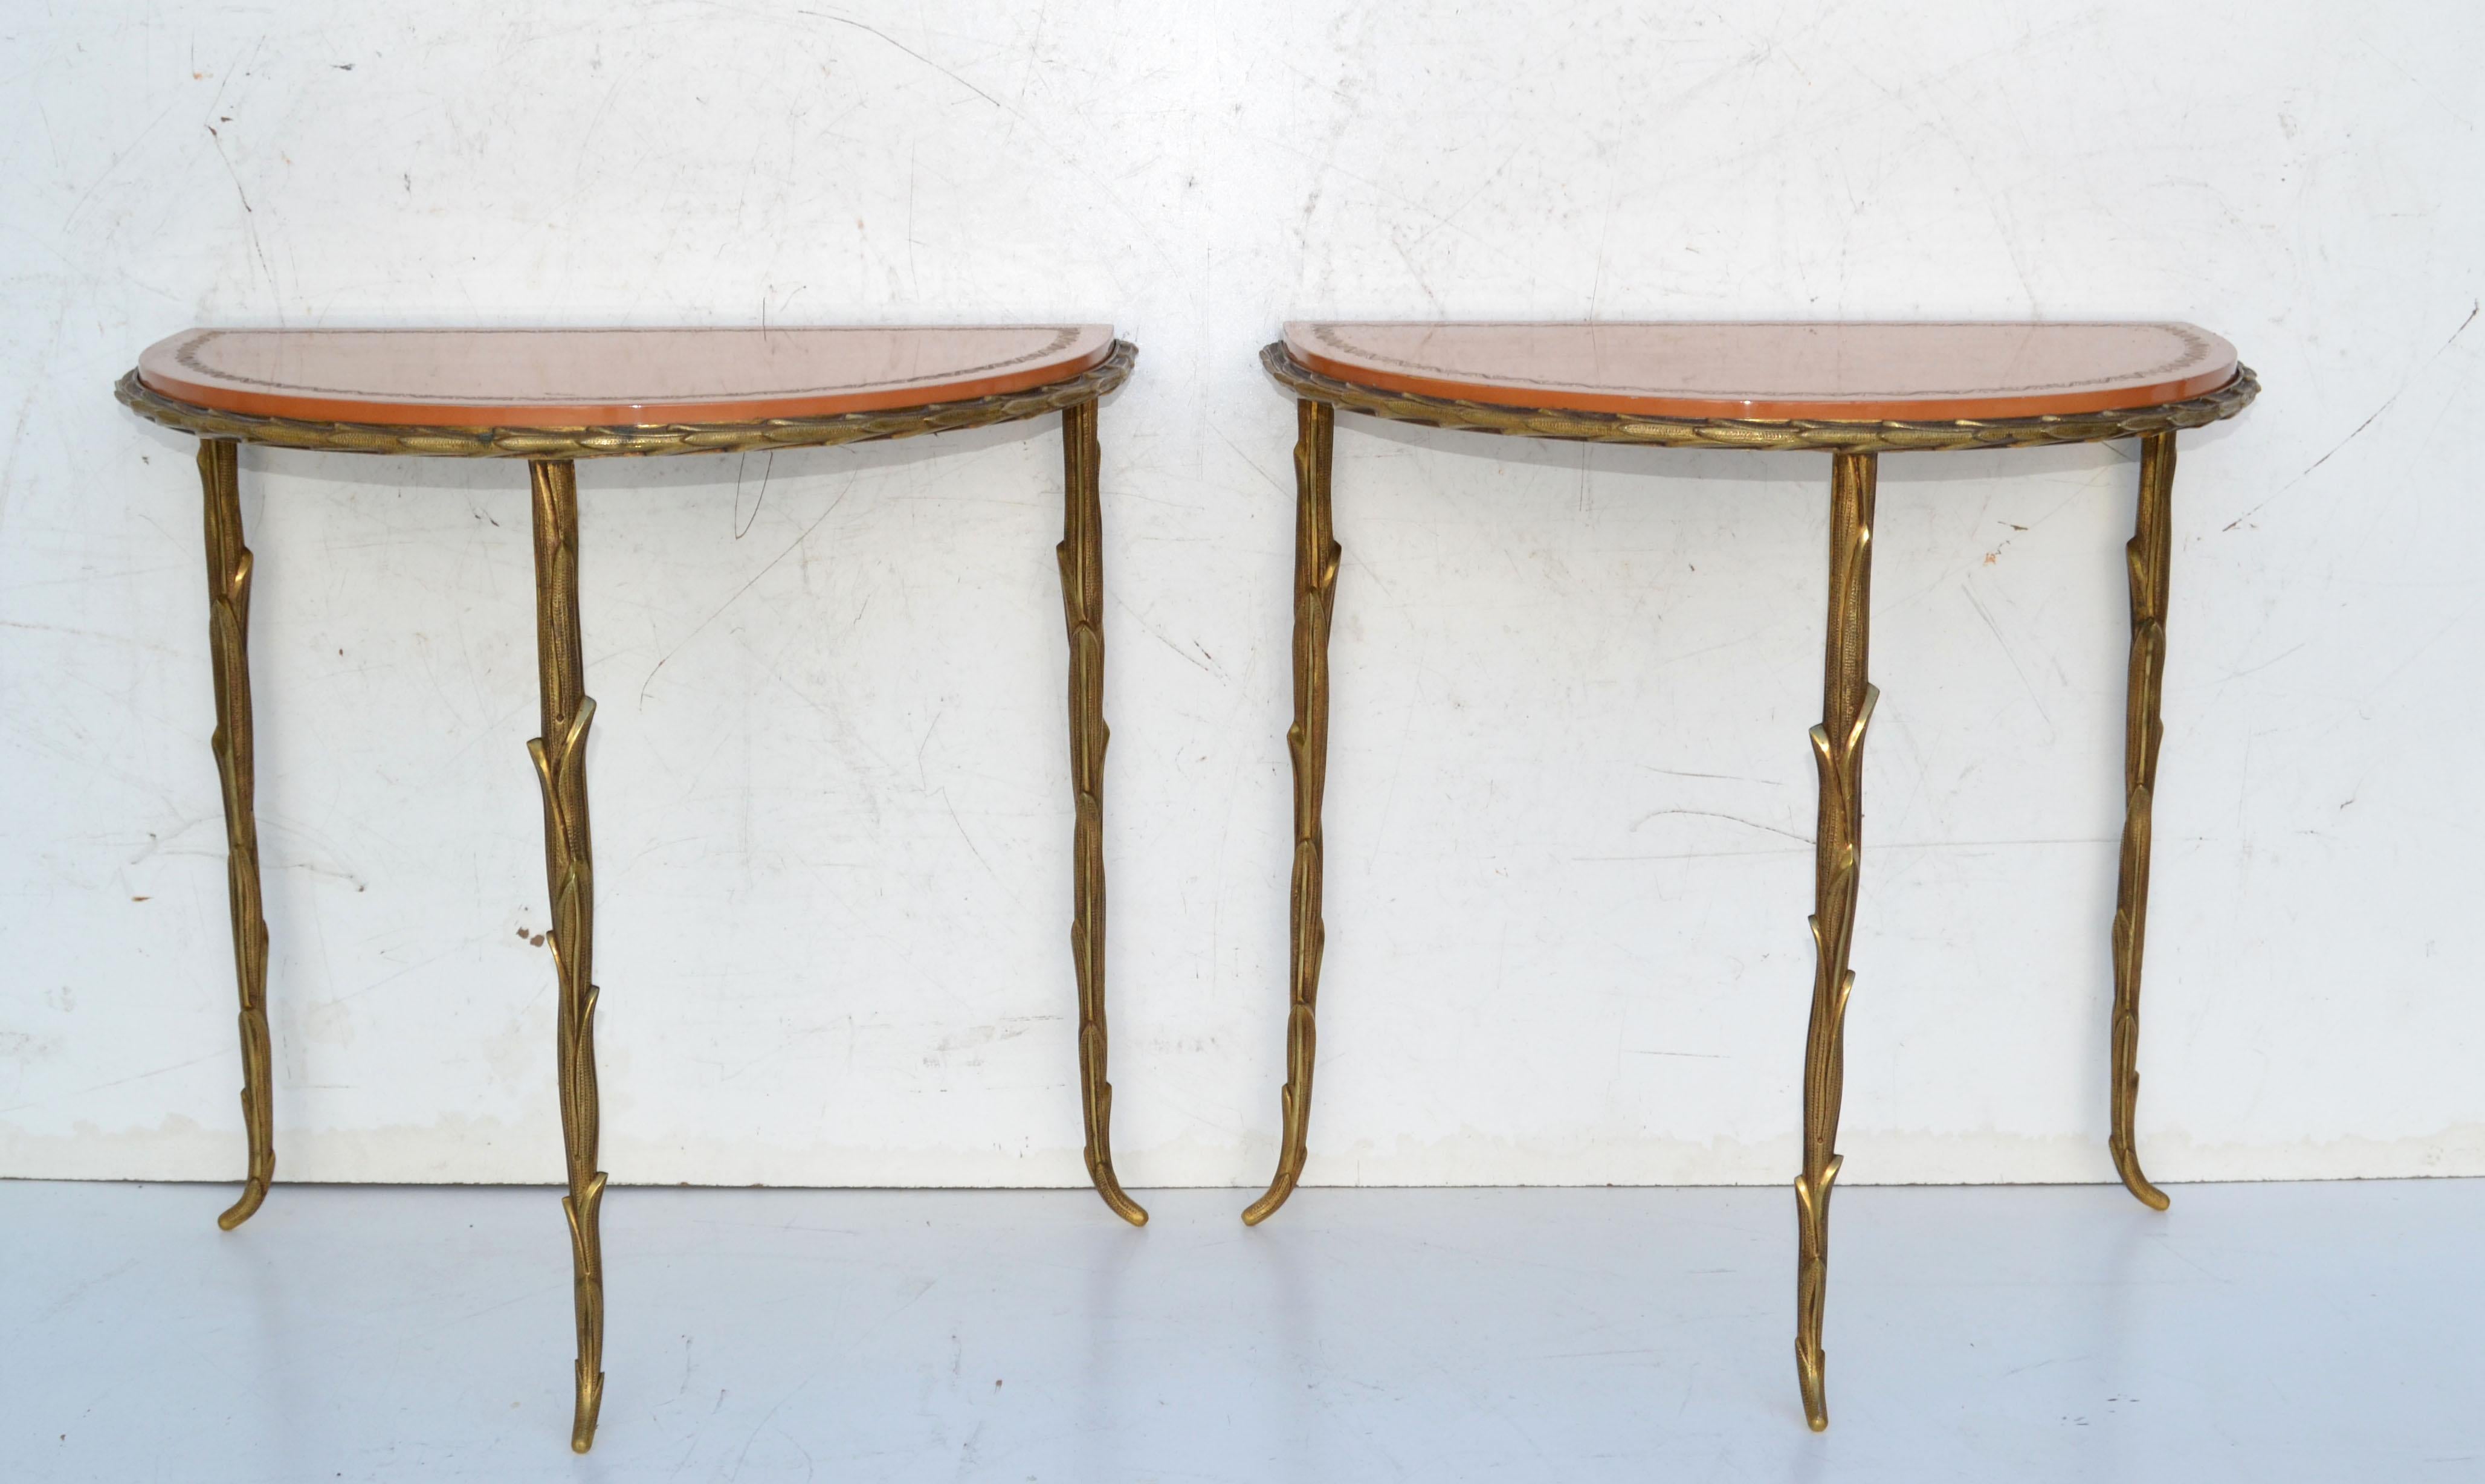 French Bronze Maison Baguès Neoclassical Semi Circle Top Side Table, Pair